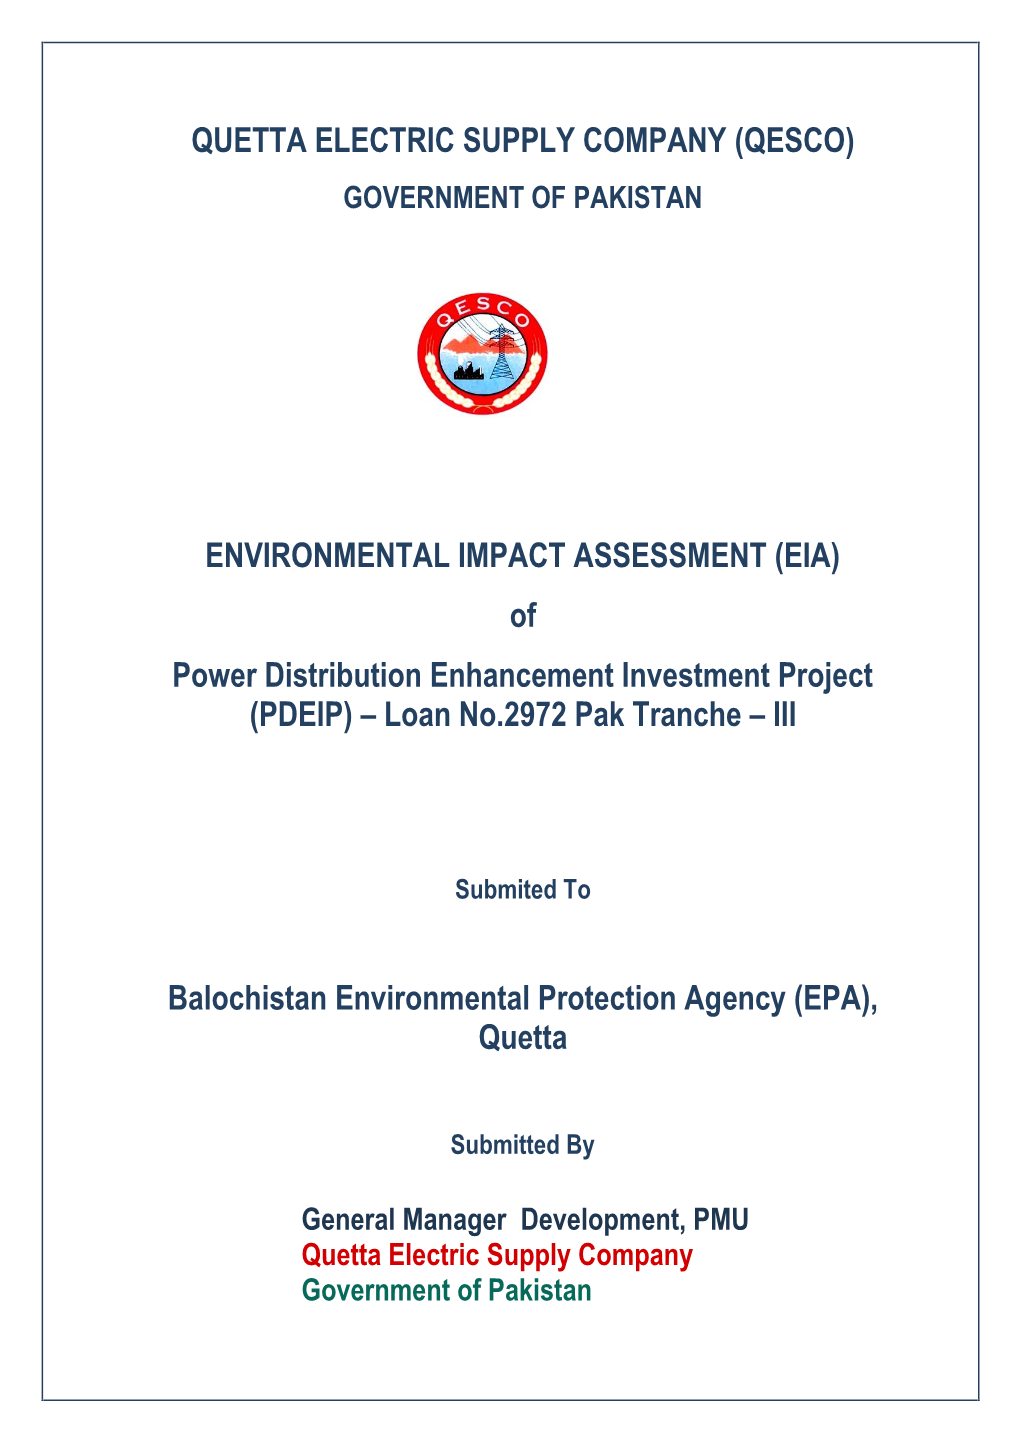 ENVIRONMENTAL IMPACT ASSESSMENT (EIA) of Power Distribution Enhancement Investment Project (PDEIP) – Loan No.2972 Pak Tranche – III